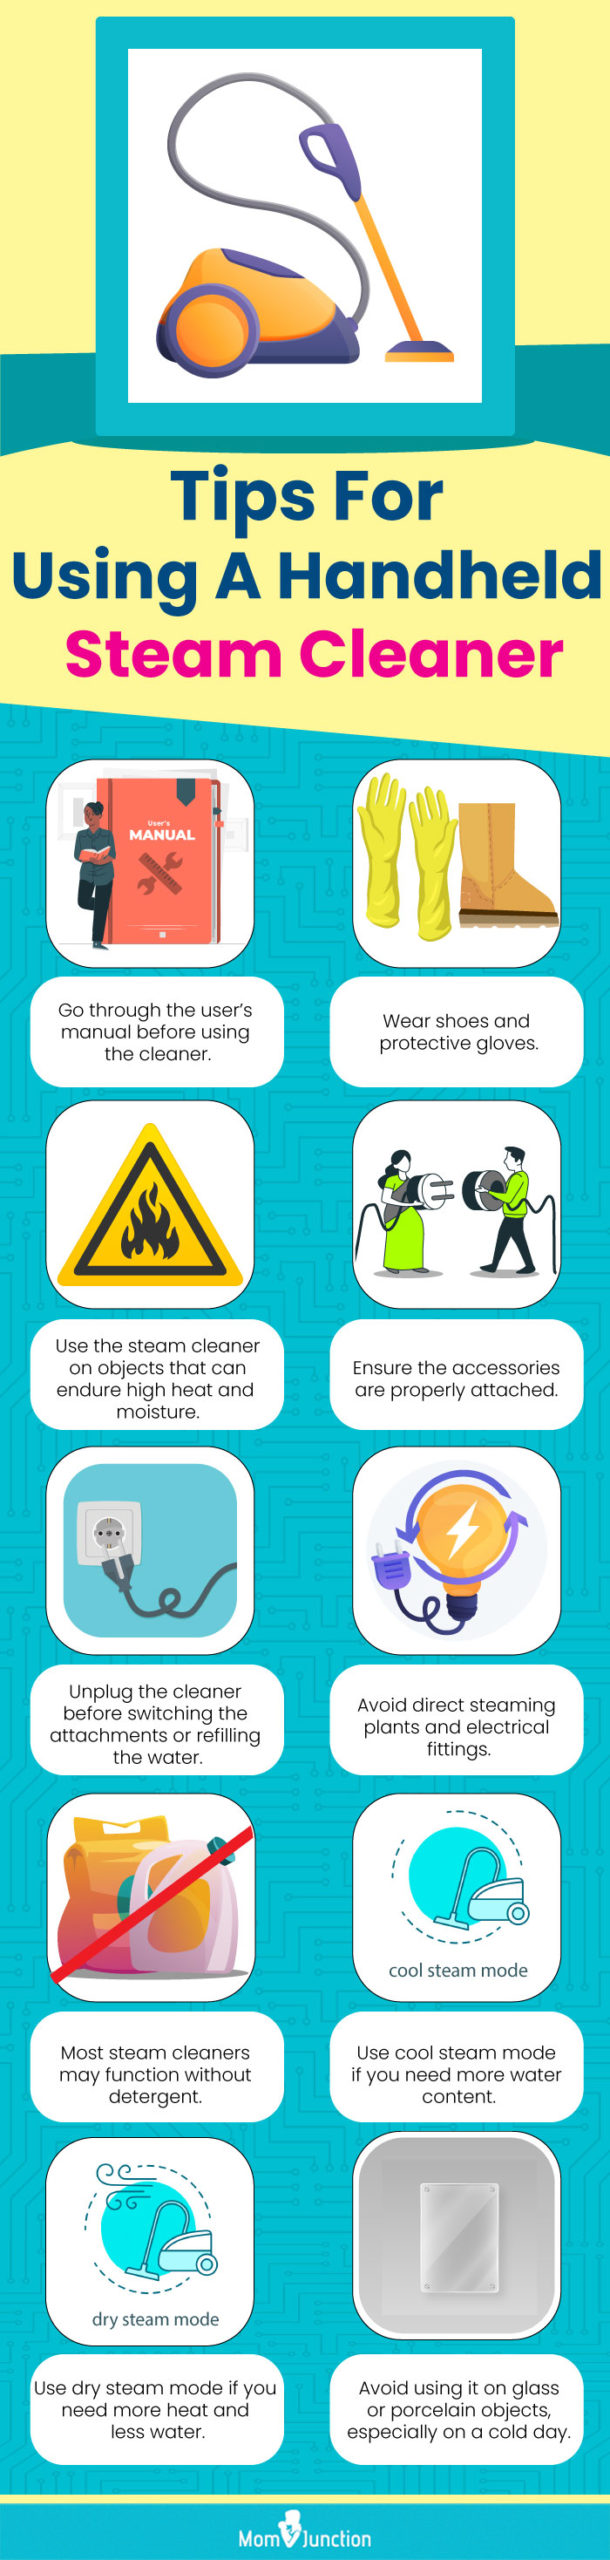 Tips For Using A Handheld Steam Cleaner